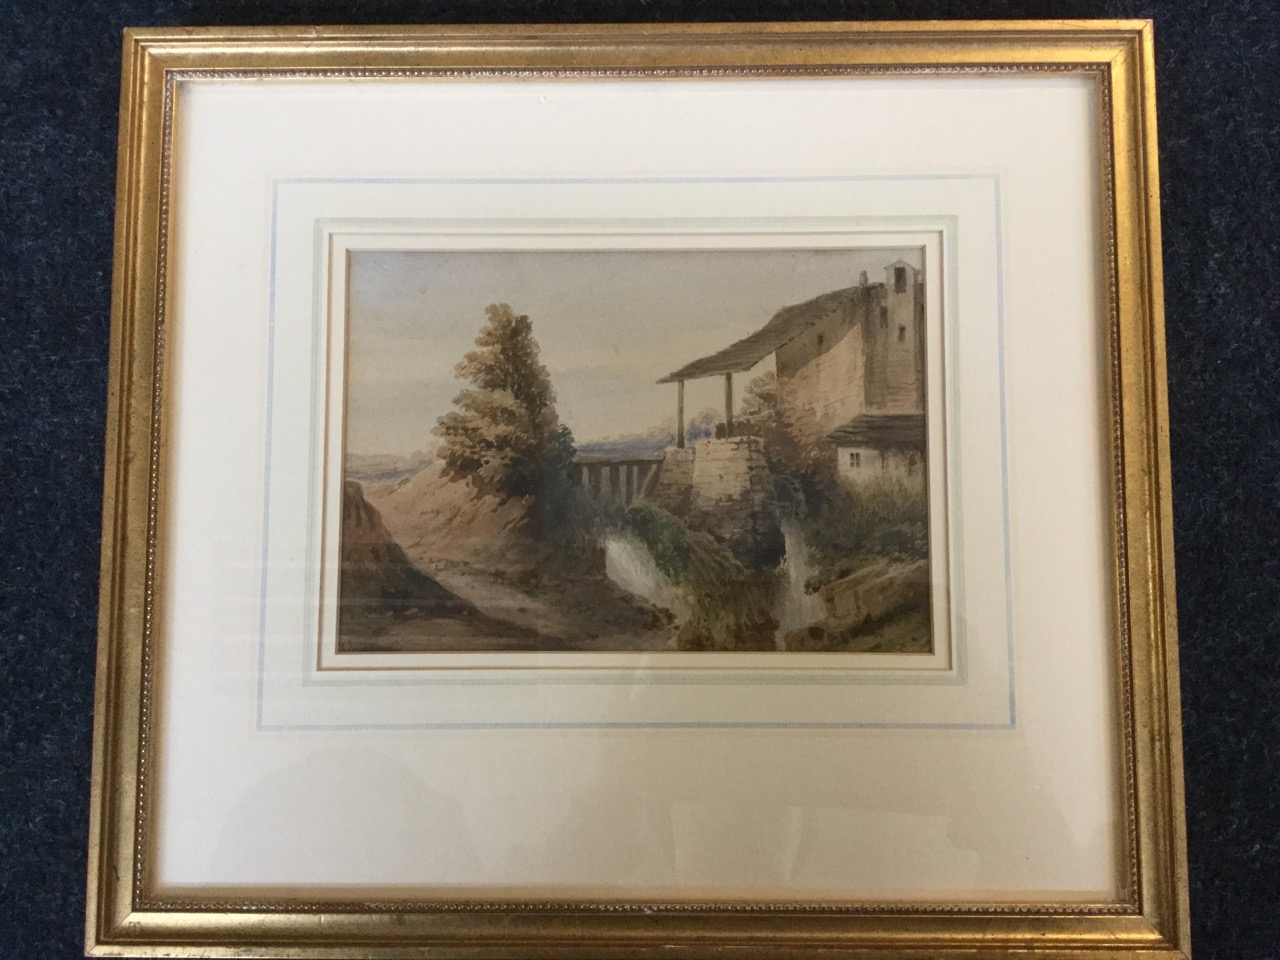 Nineteenth century English school, watercolour, watermill in landscape, signed indistinctly, mounted - Image 2 of 3